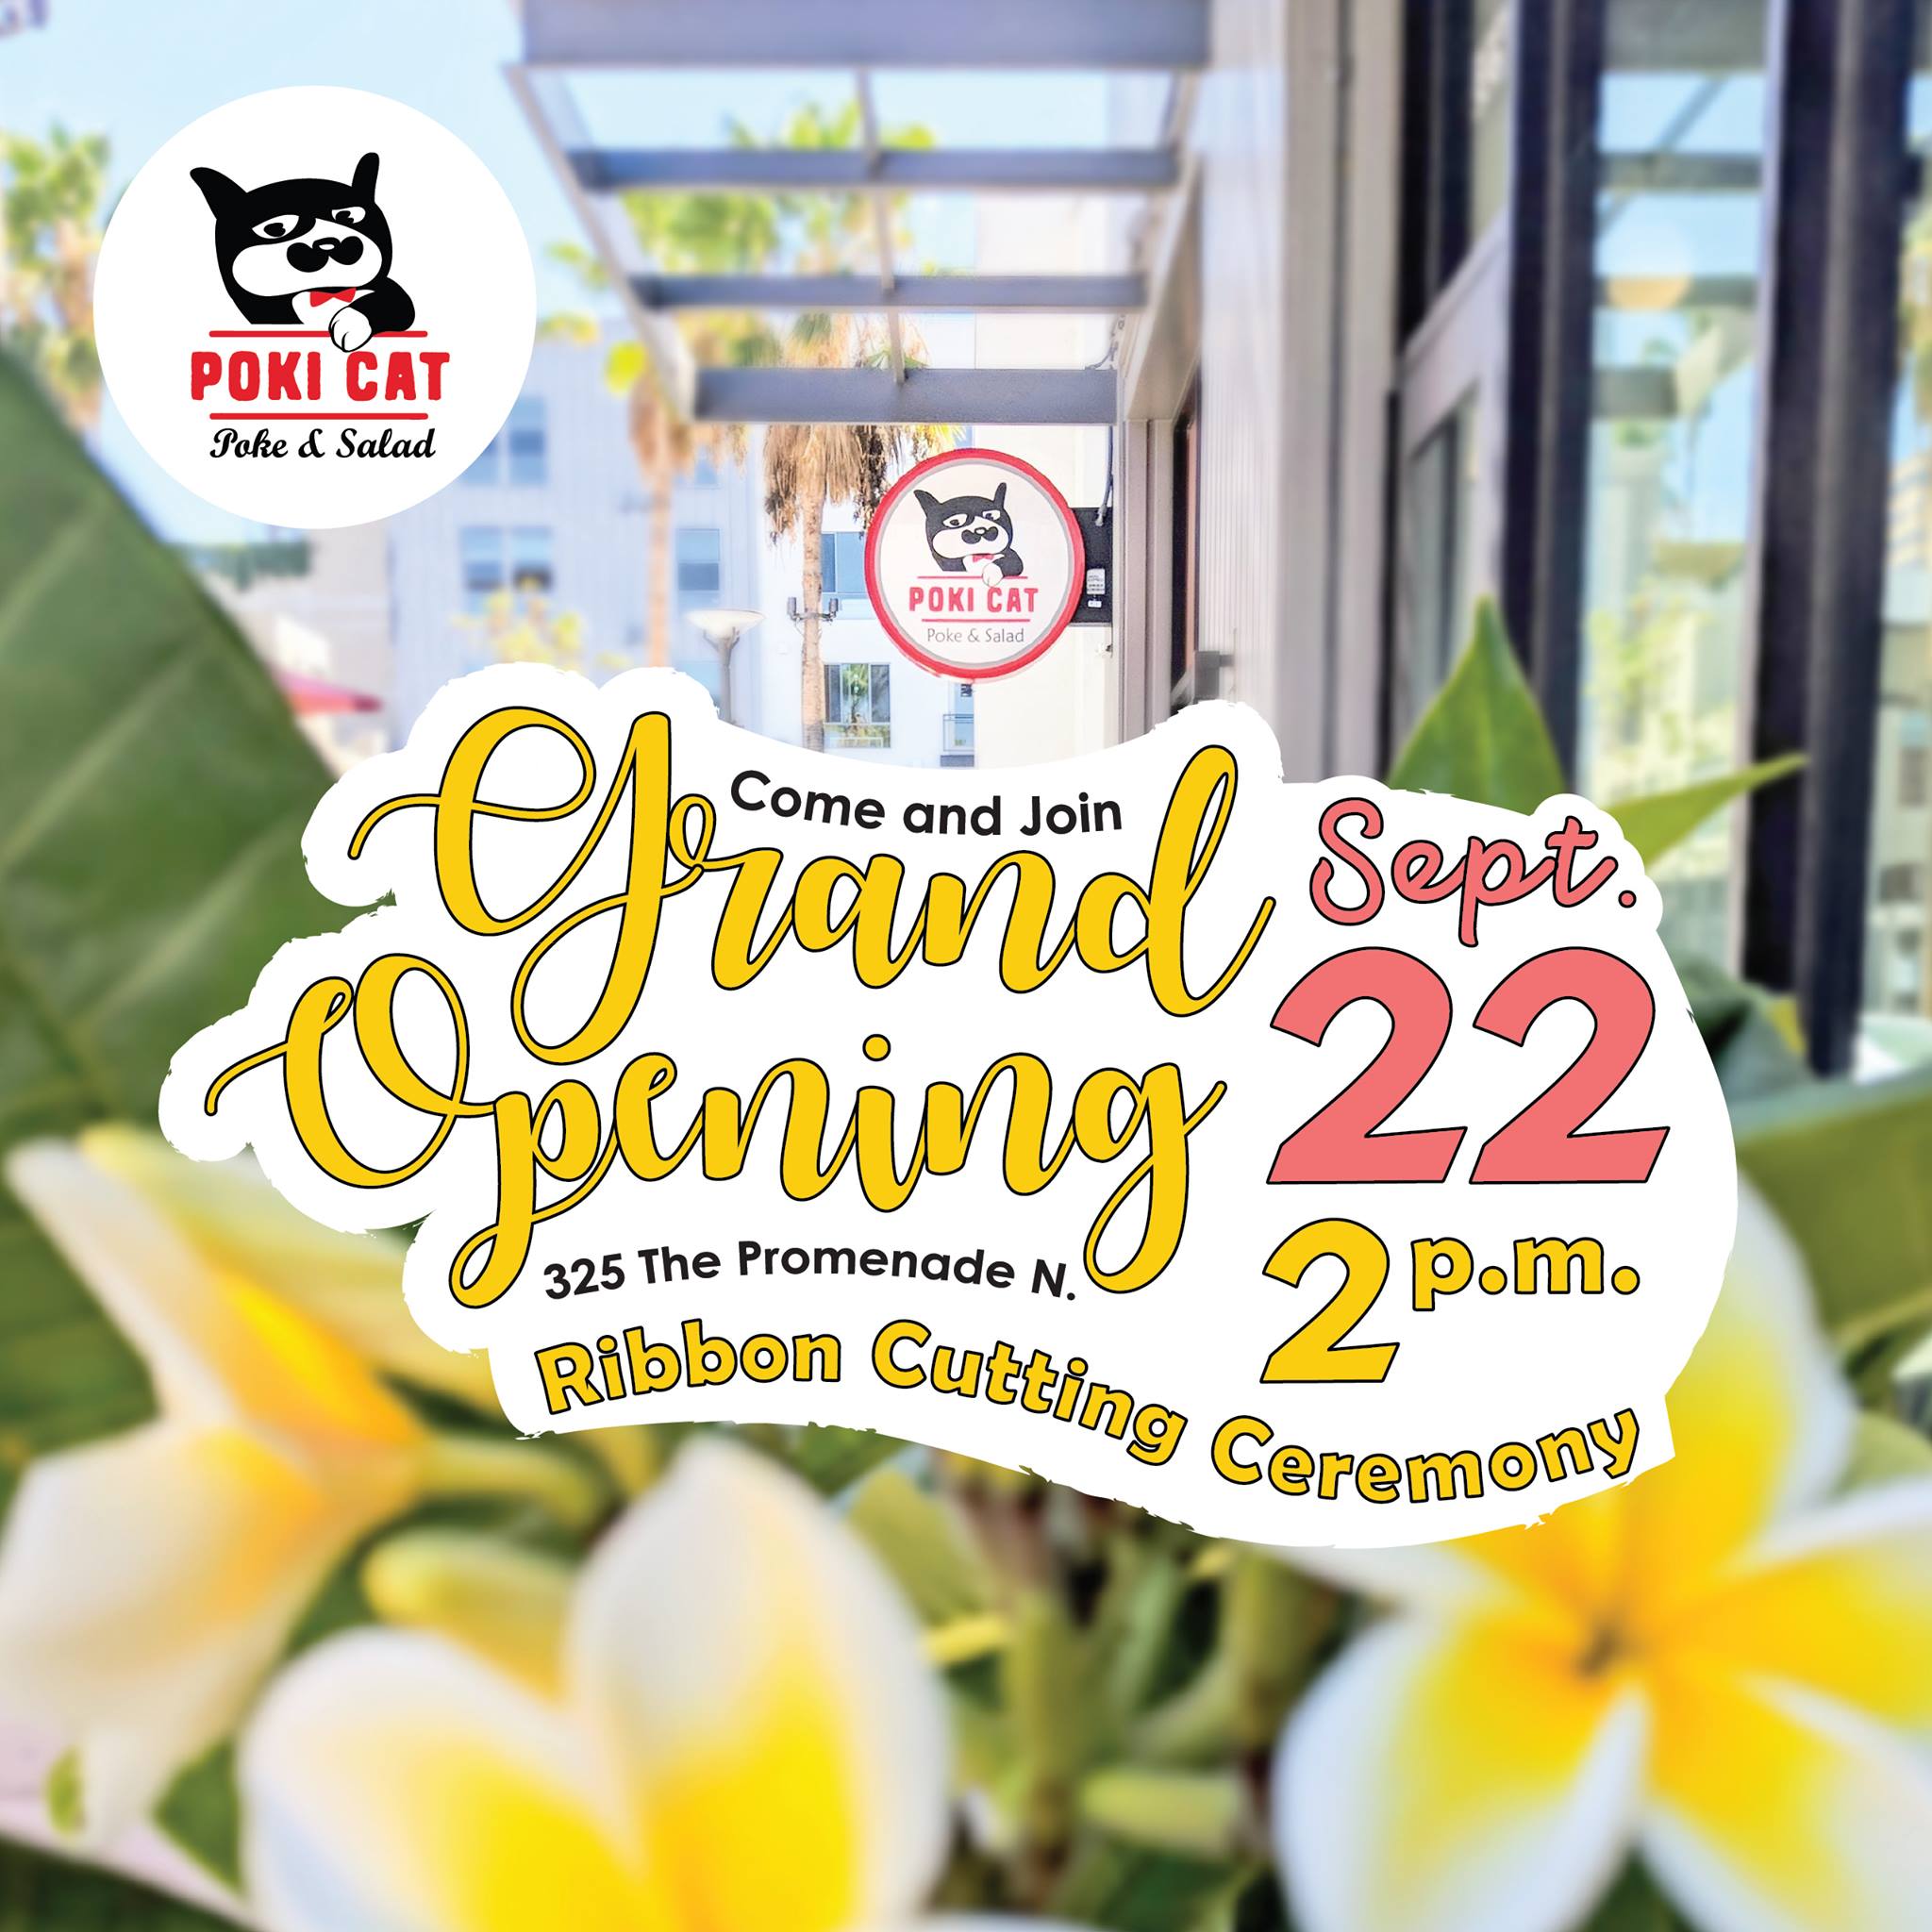 Poki Cat Officially Opens at The Streets in DTLB